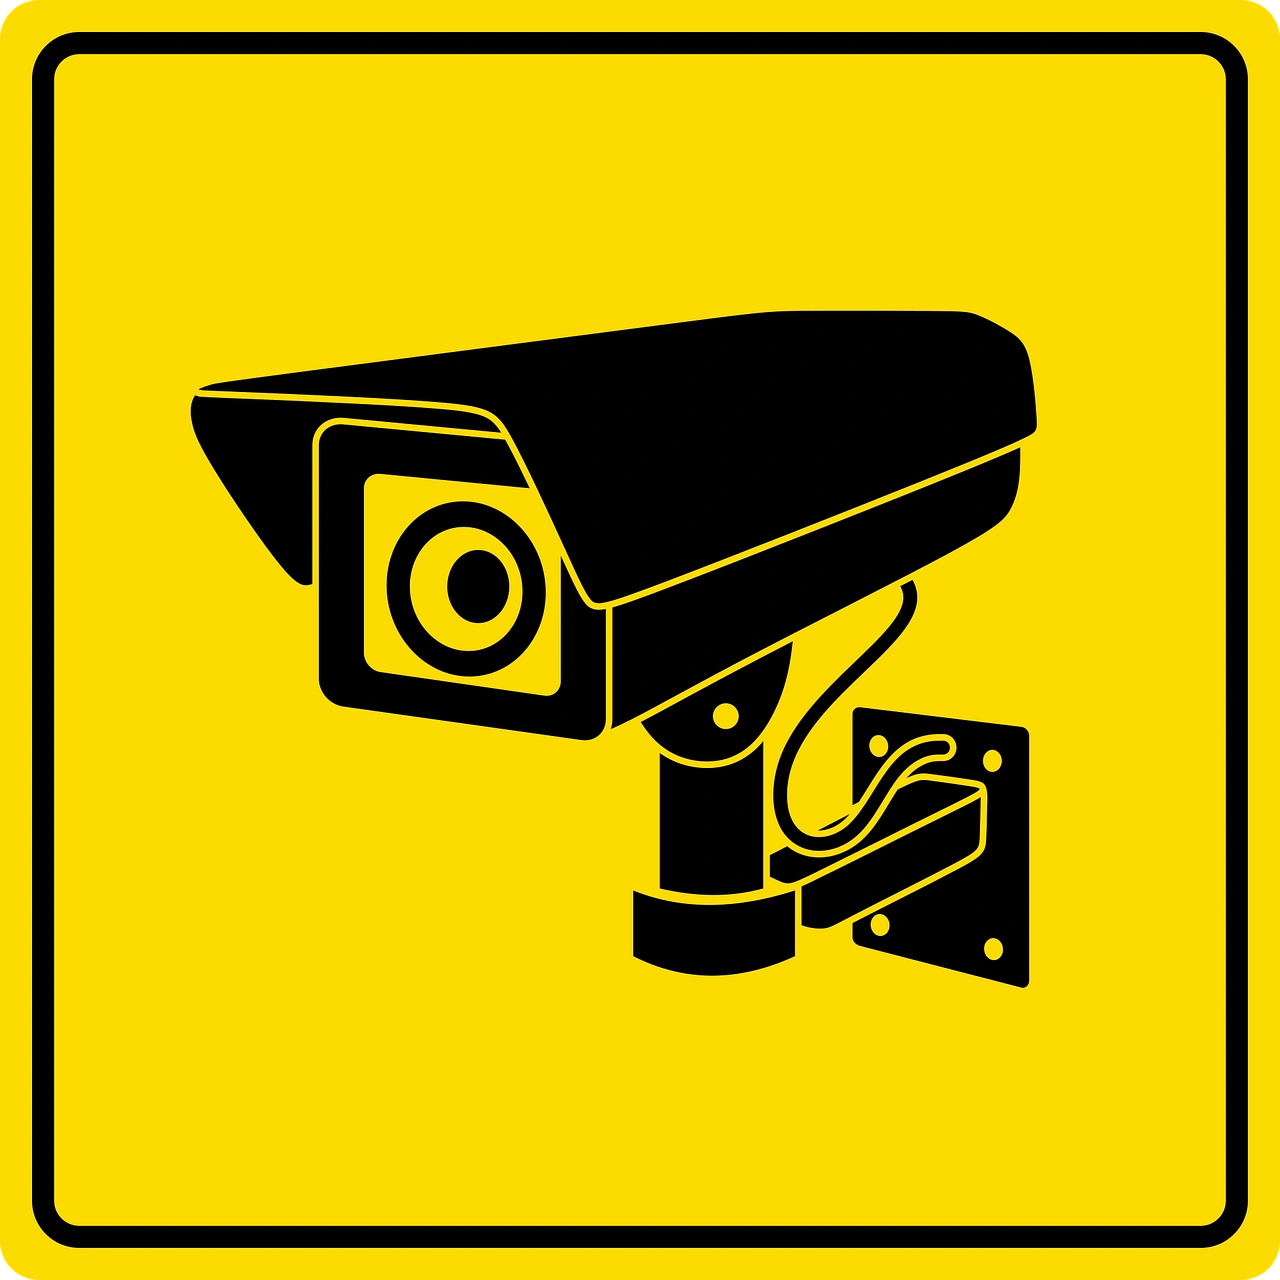 Surveillance Camera Code of Practice: Who, What and Why?